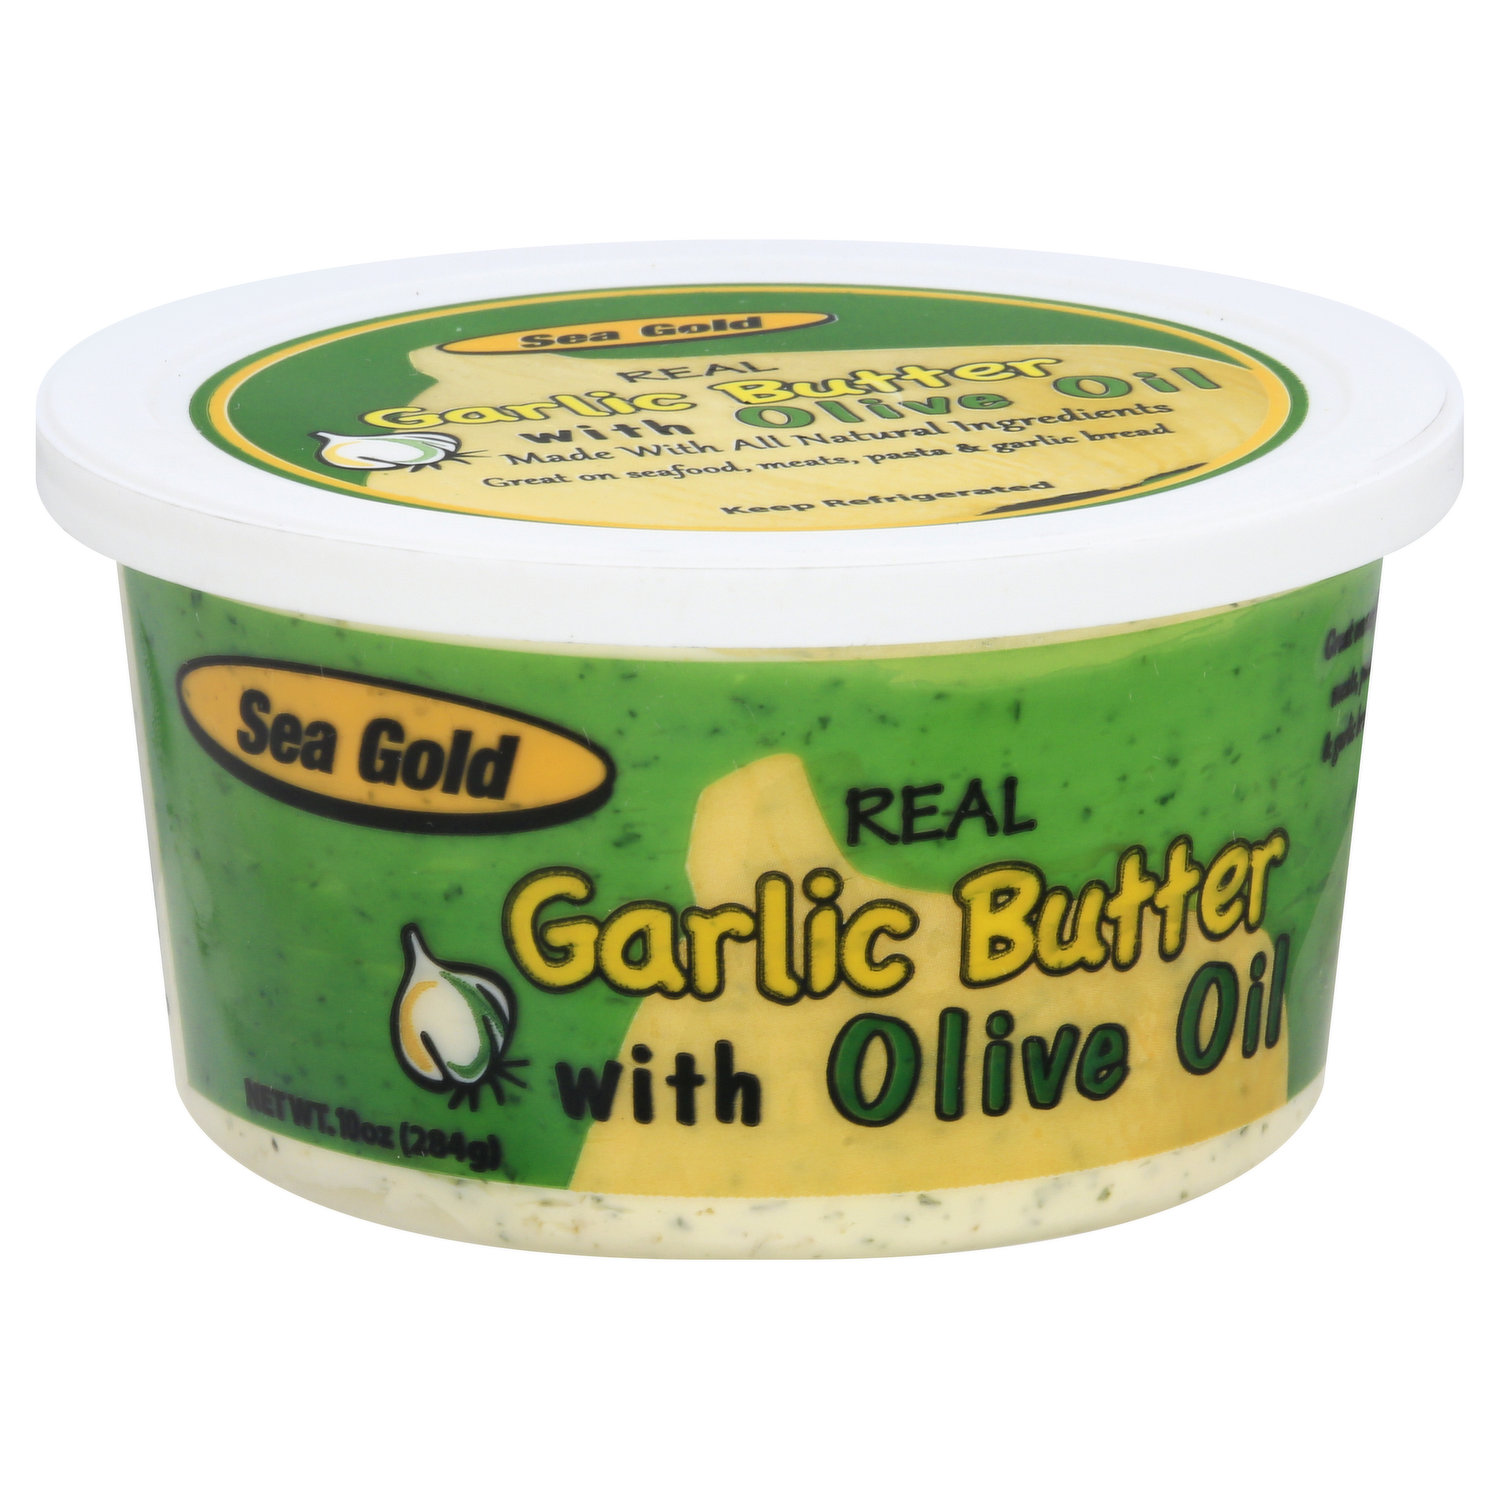 Garlic Herb Butter - All the King's Morsels